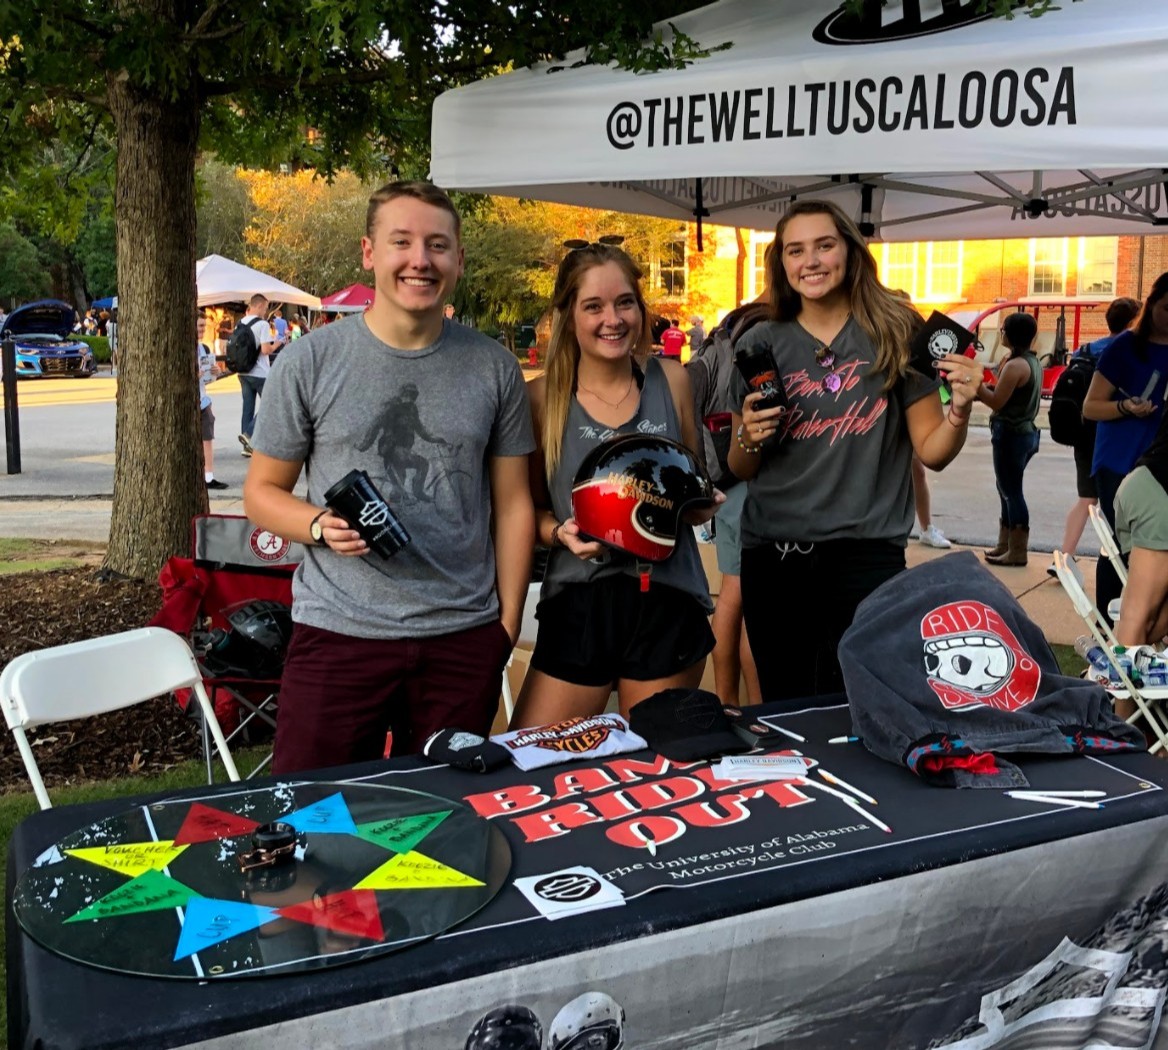 500+: Students @UofAlabama who signed up for the Bama Rides Out motorcycle club, founded by our ambassadors. #CampusAgencyByTheNumbers #experientialmarketing #GenZmarketing #collegemarketing #CampusAgencyPowered